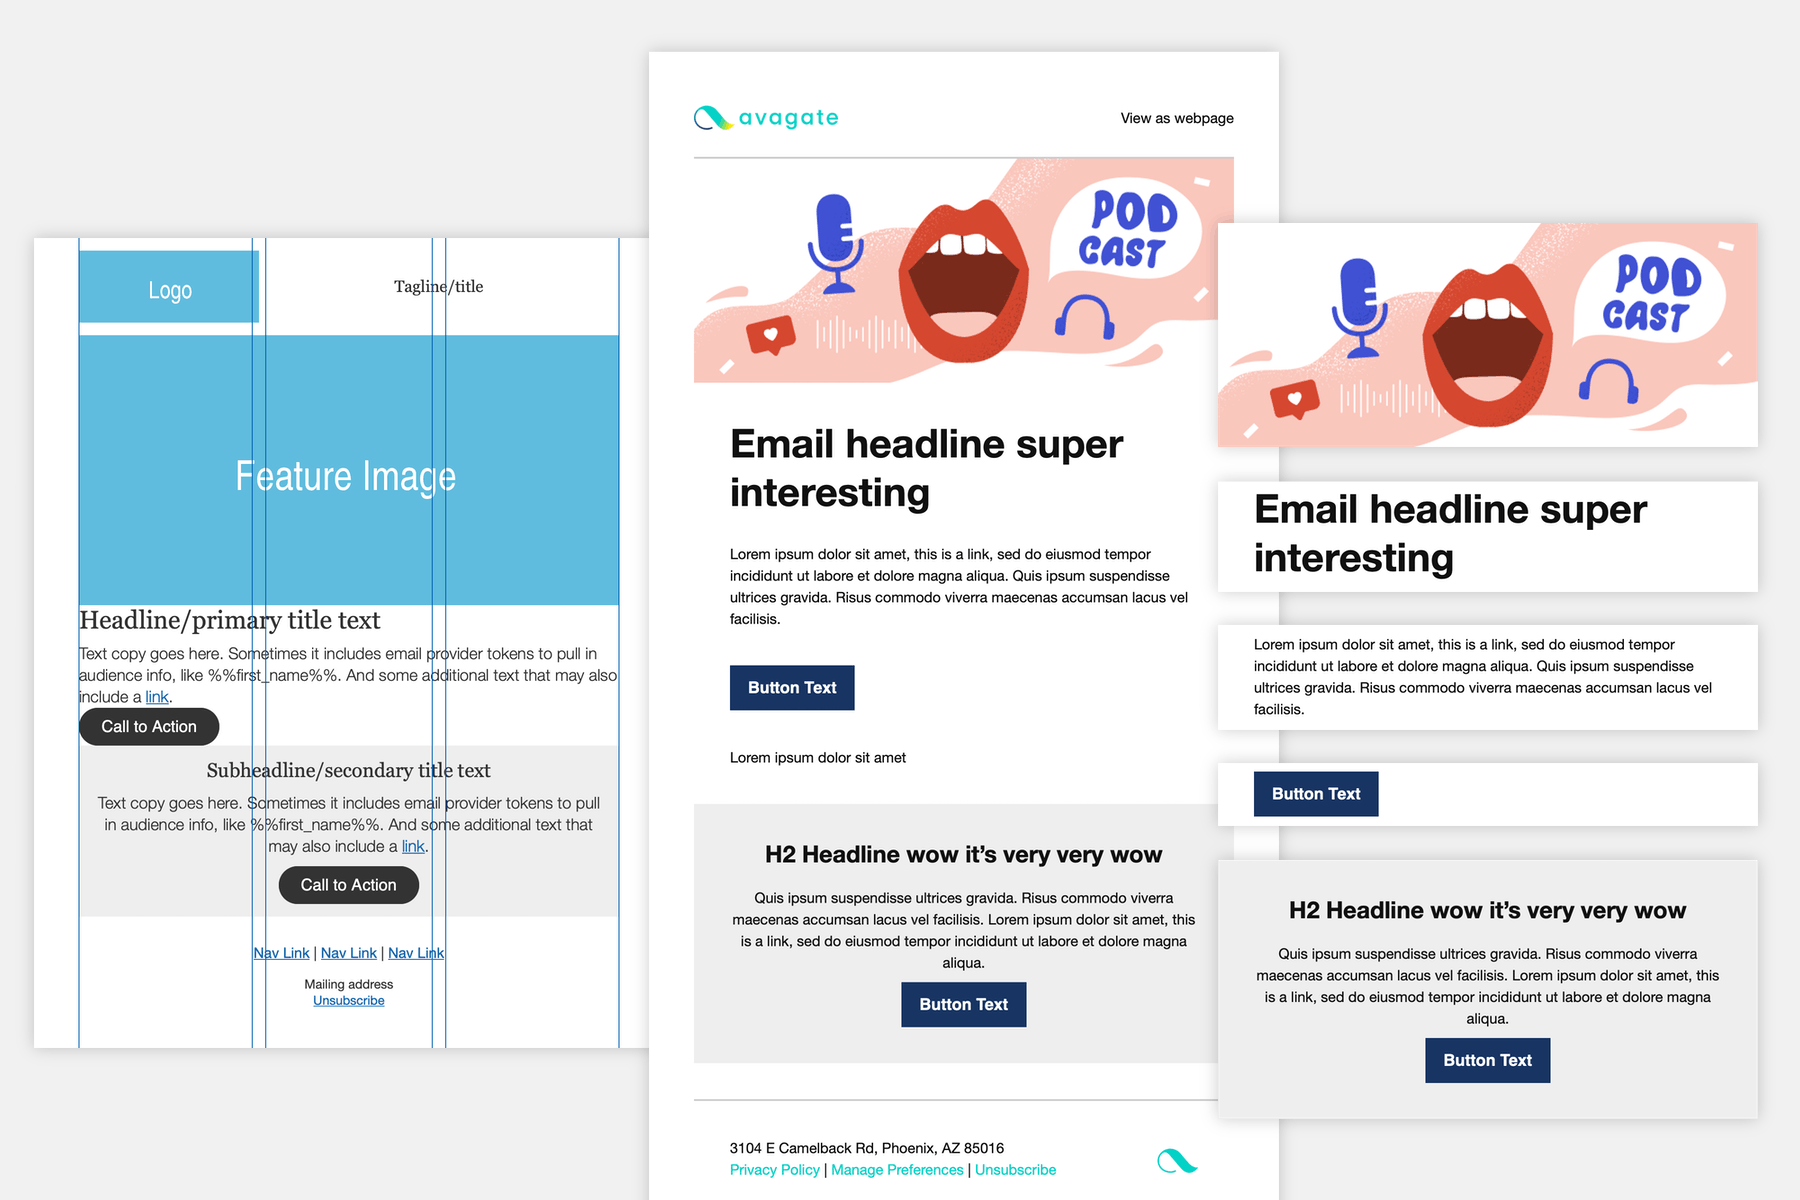 An email design going from structural wireframes, to including branded elements, to layout modules being used.